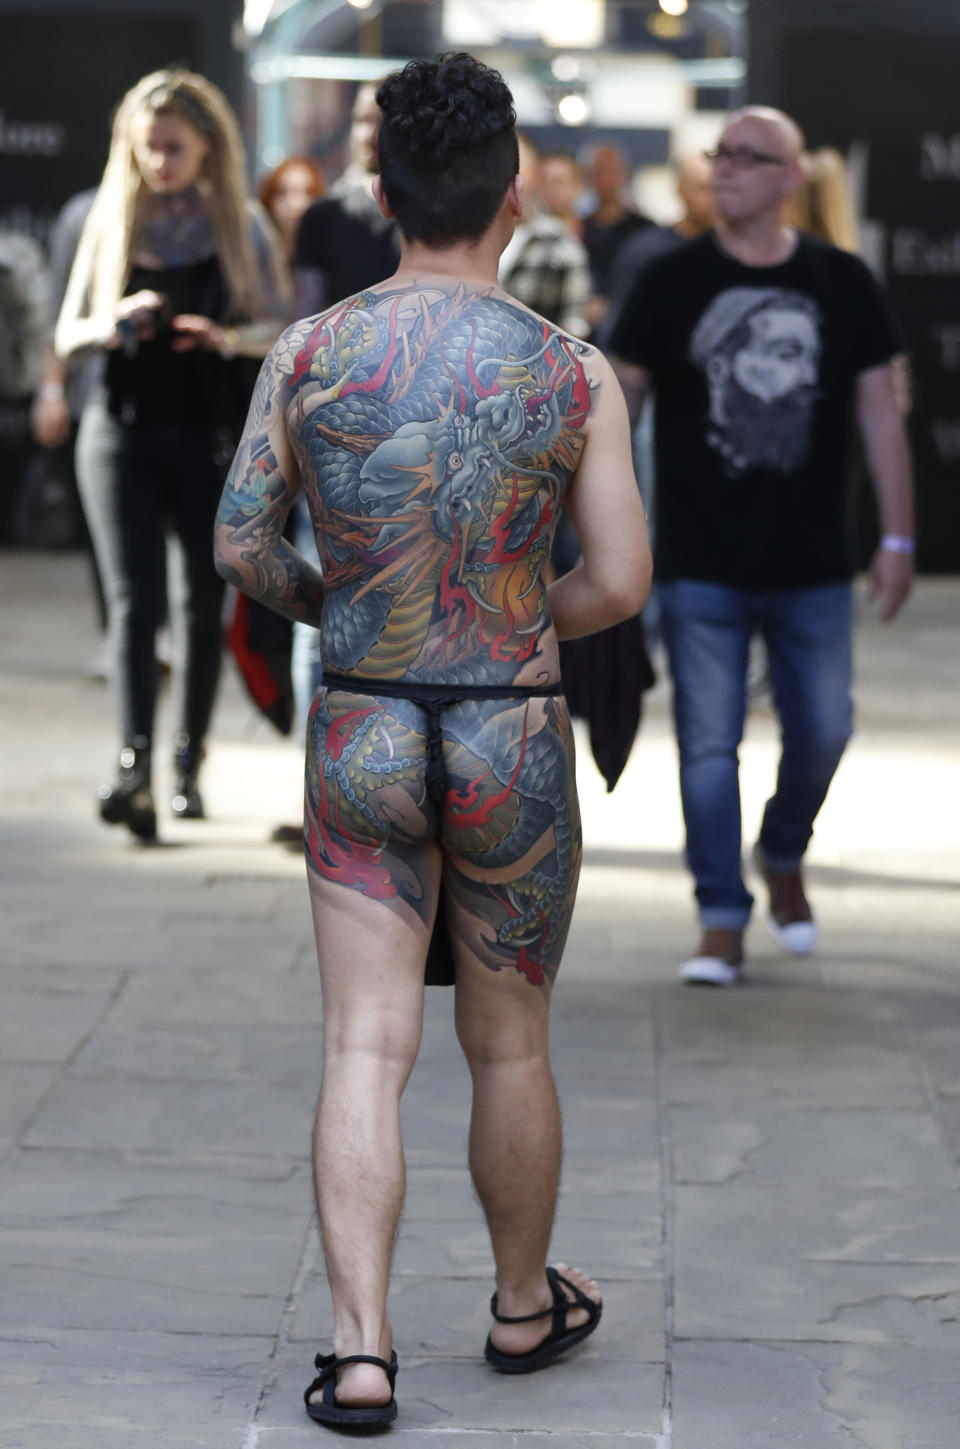 <p>A visitor displays his tattoos at The International Tattoo Convention in London, Friday, Sept. 22, 2017. (Photo: Kirsty Wigglesworth/AP) </p>